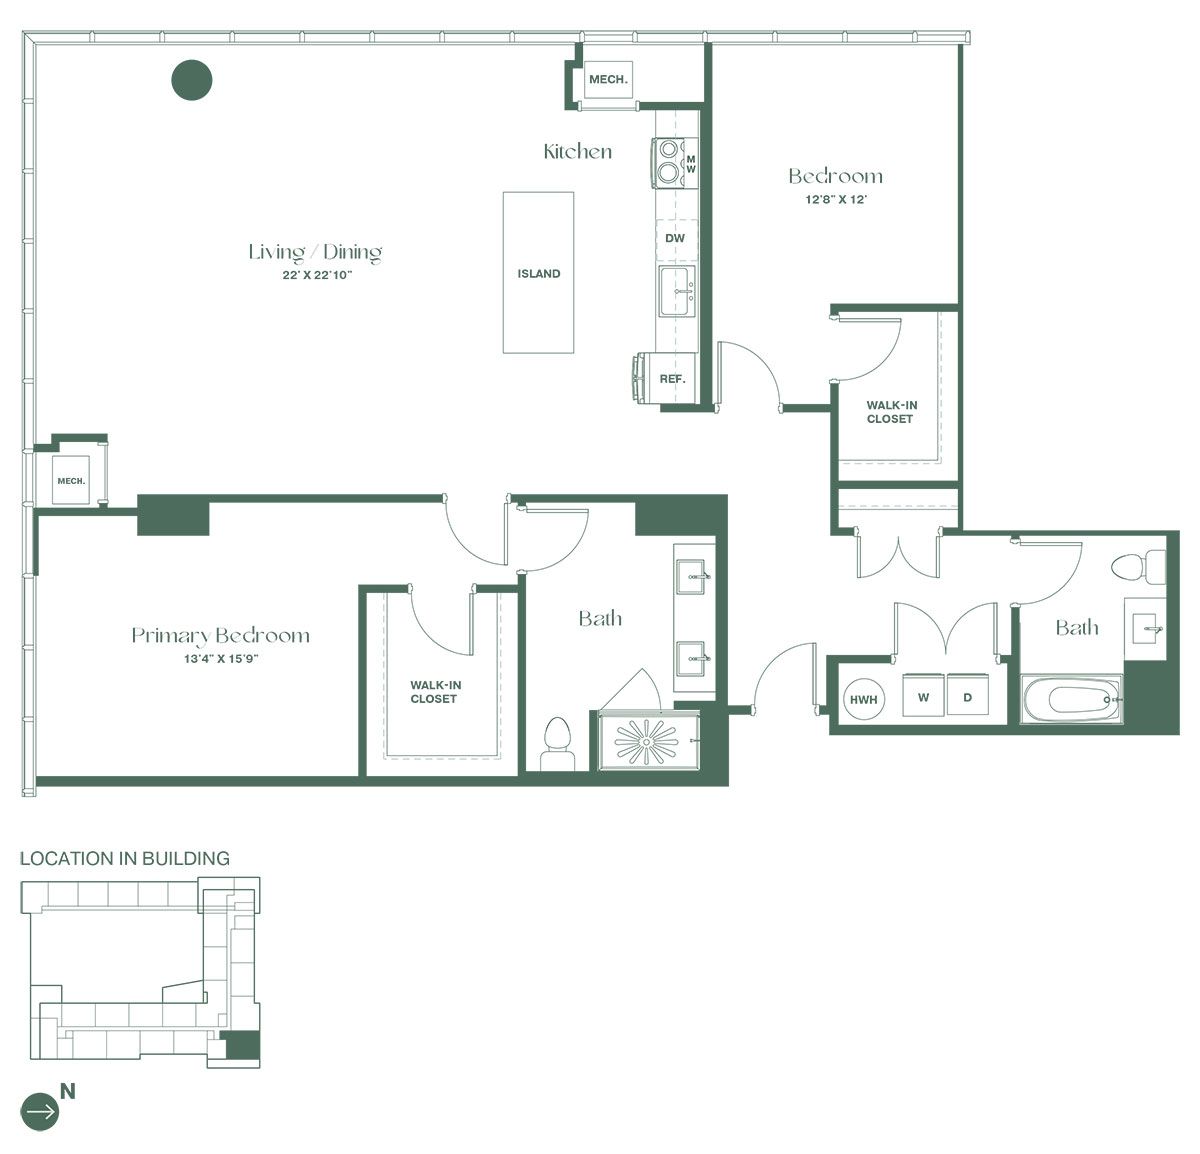 This floorplan for a two-bedroom, two-bathroom apartment at RVR at Xchange opens into a hallway, leading to a full bathroom and a bedroom. Continue on to the open kitchen with a dishwasher and kitchen island. Past the kitchen is a spacious living and dining room area and the entrance to the primary bedroom suite with a large walk-in closet, and full bathroom with double sinks.